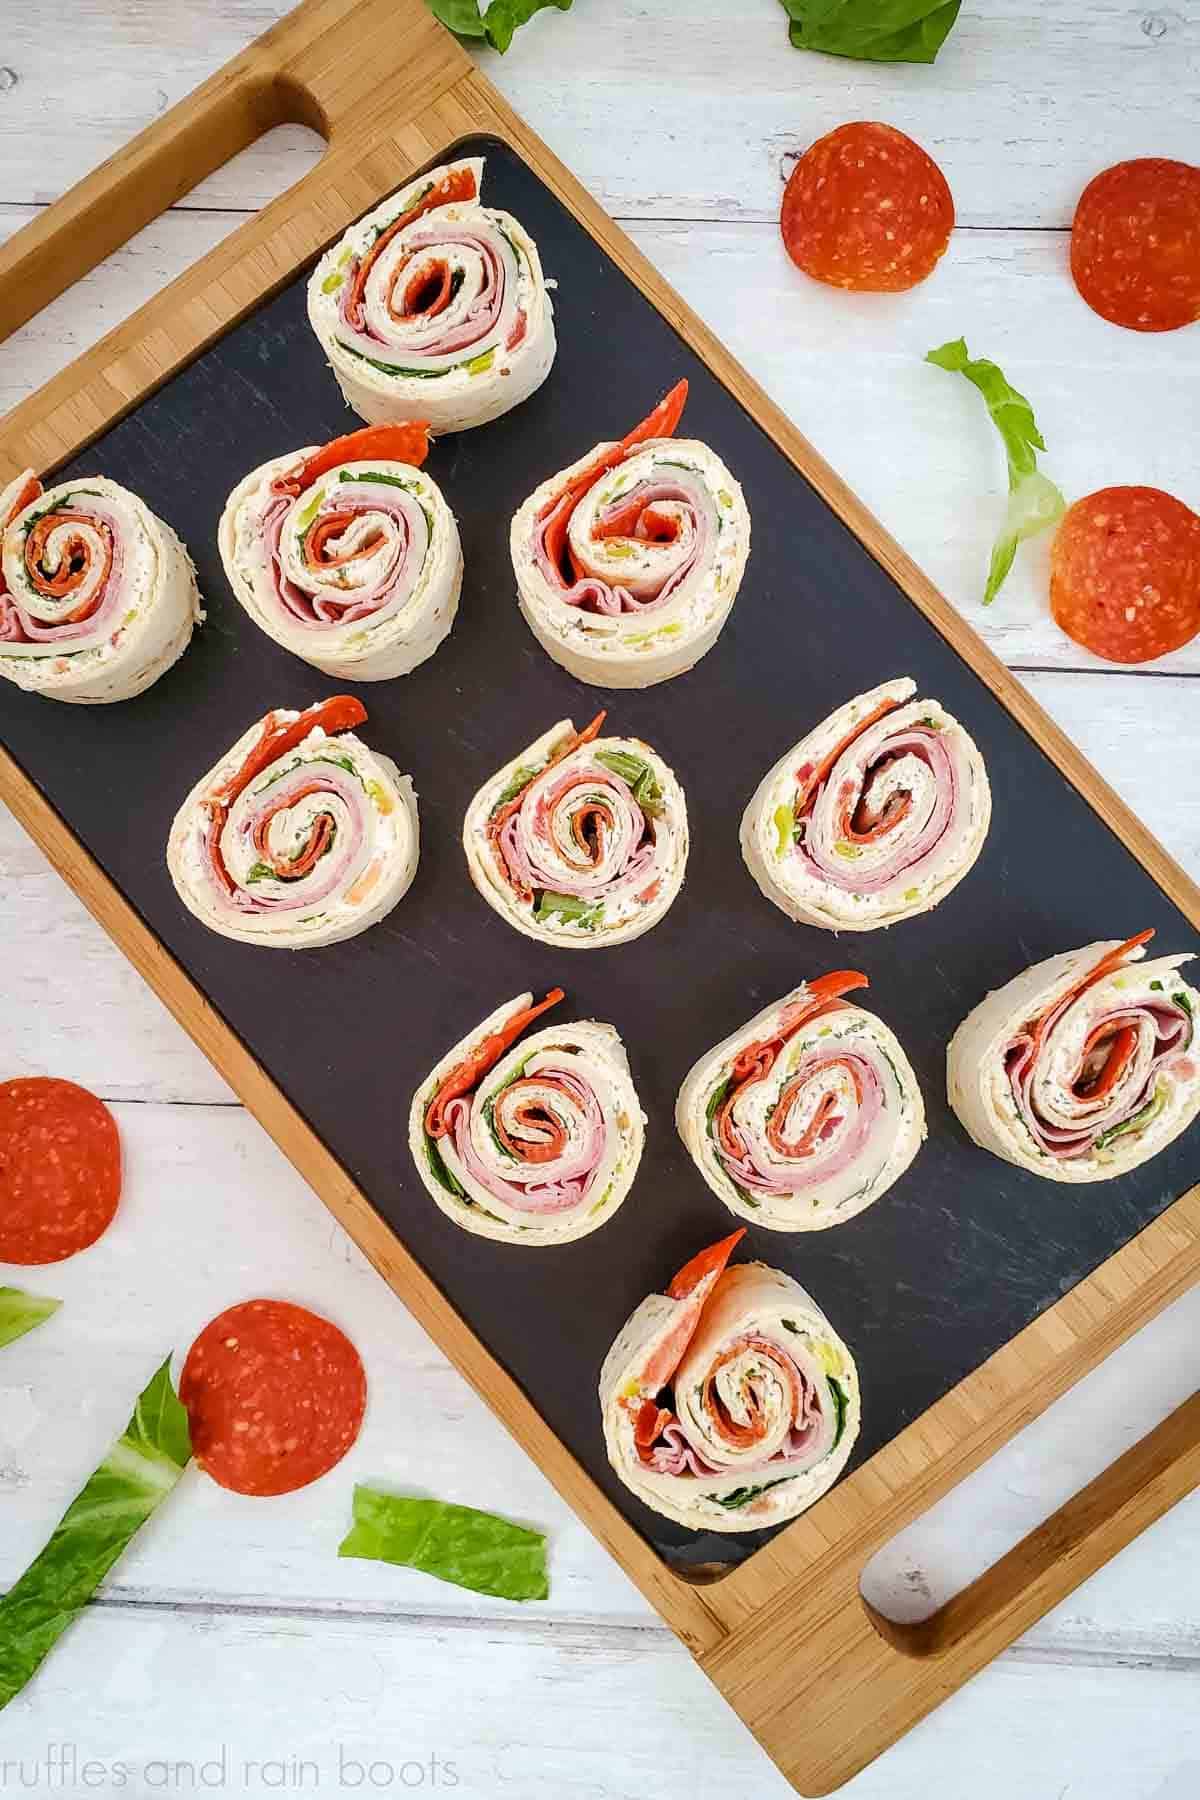 Vertical image of 10 Italian pinwheel sandwiches on a cutting board with pepperoni and lettuce on white wood.